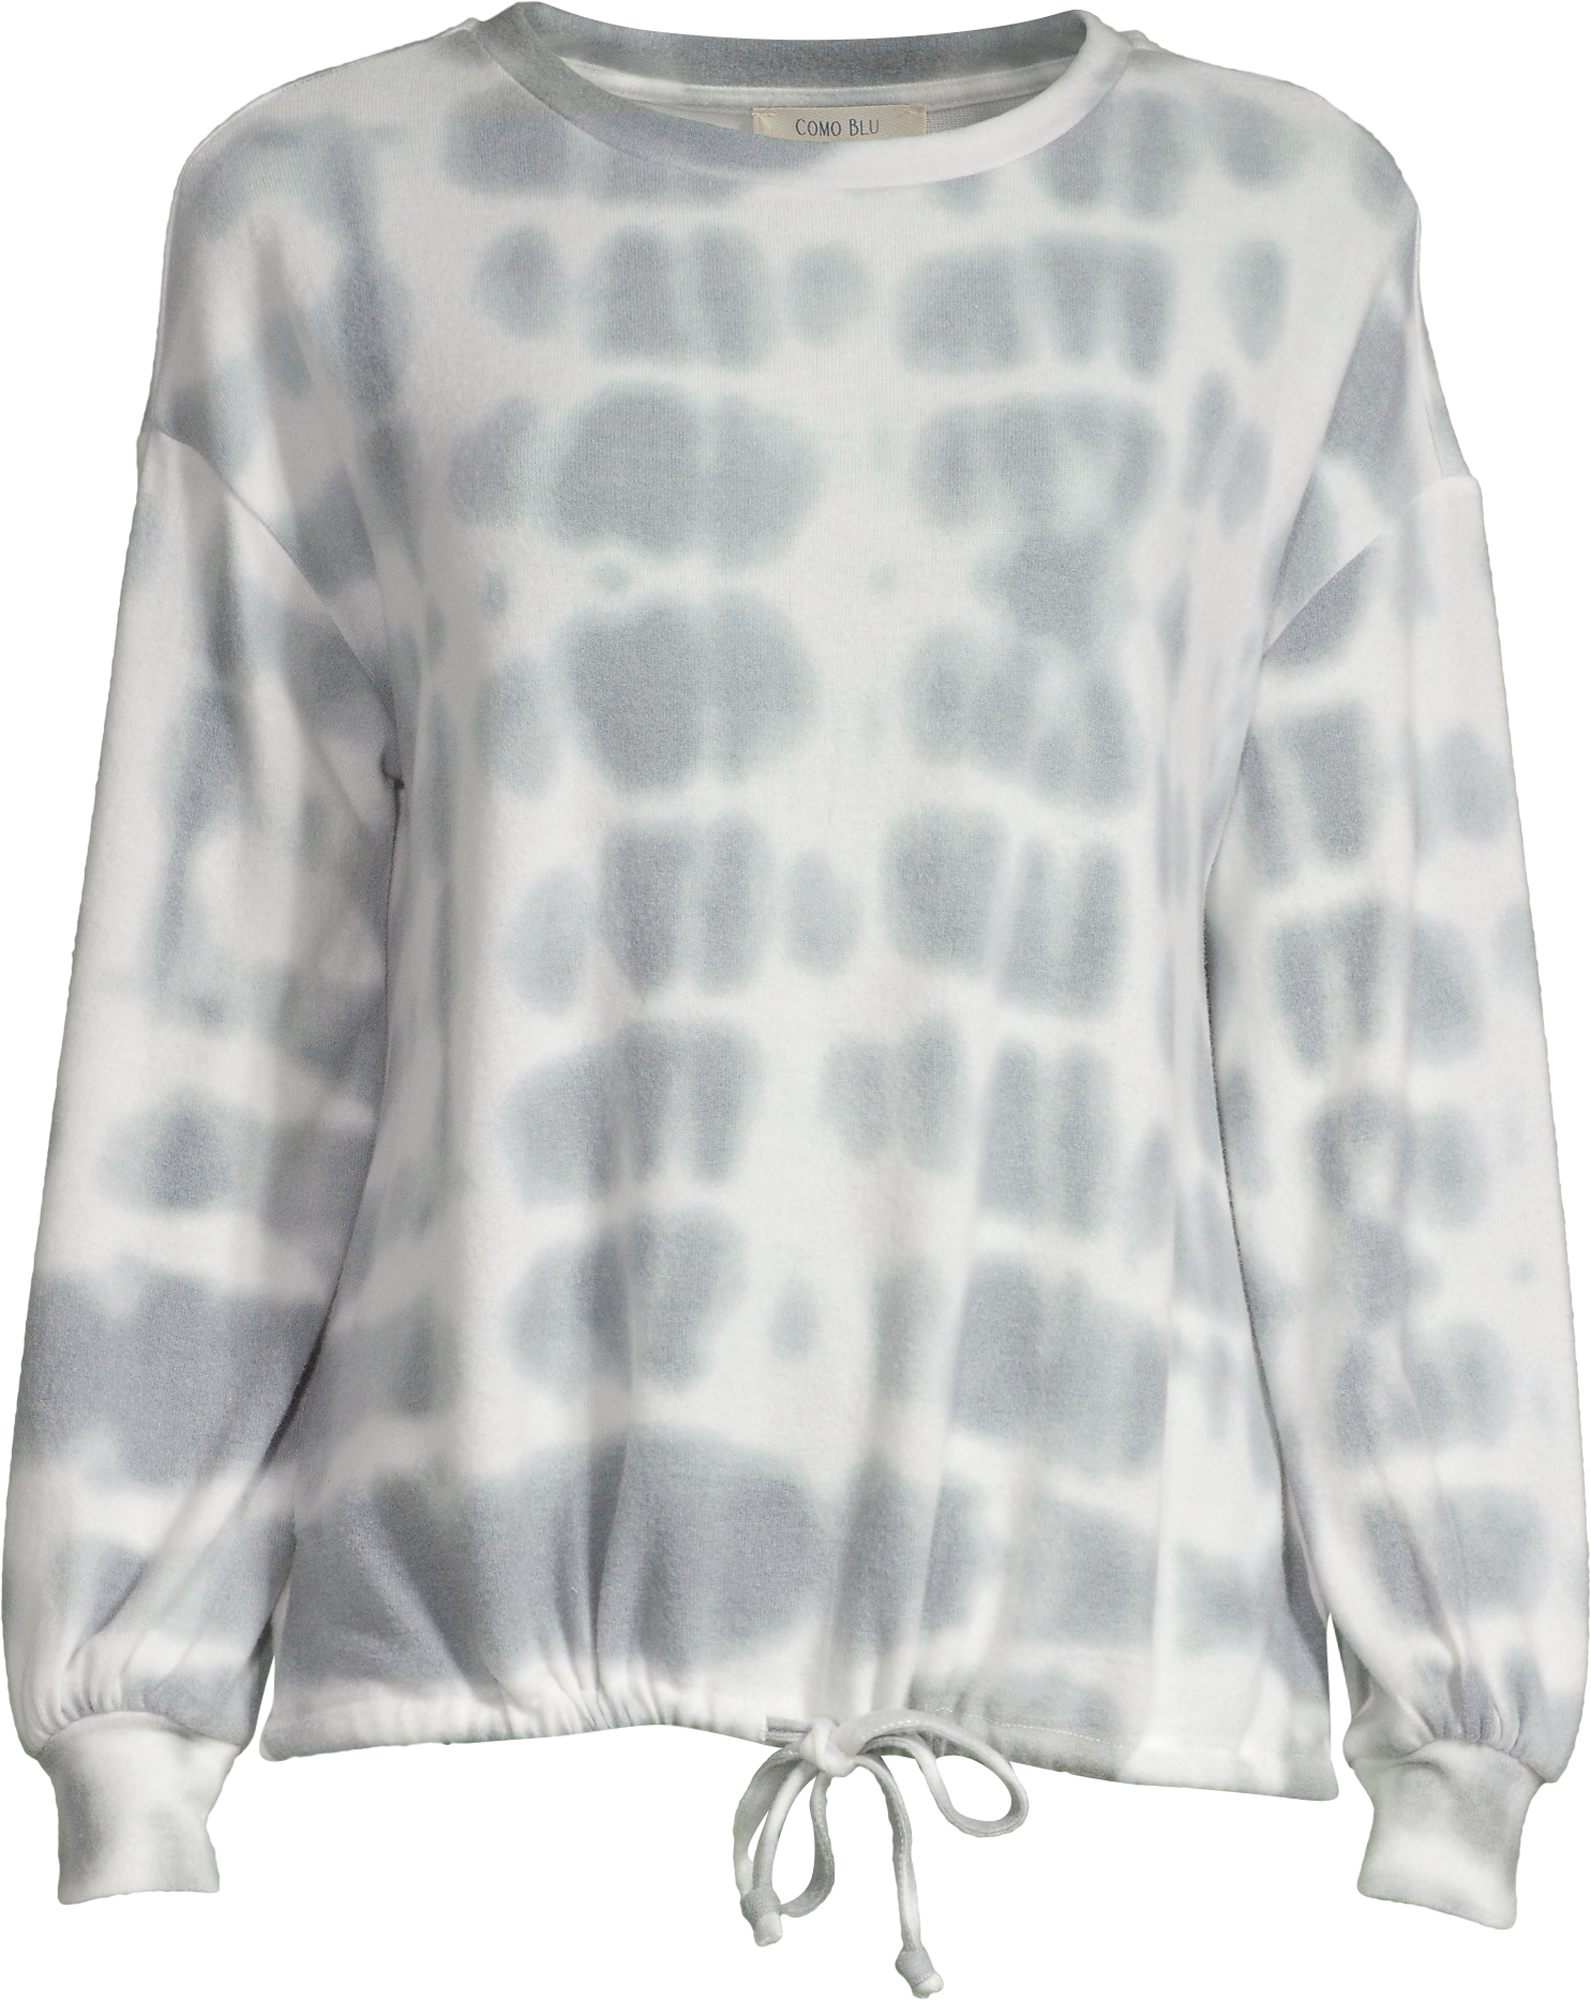 Como Blu Women's Athleisure Hacci Tie Dye Pullover with Drawstring - image 5 of 6